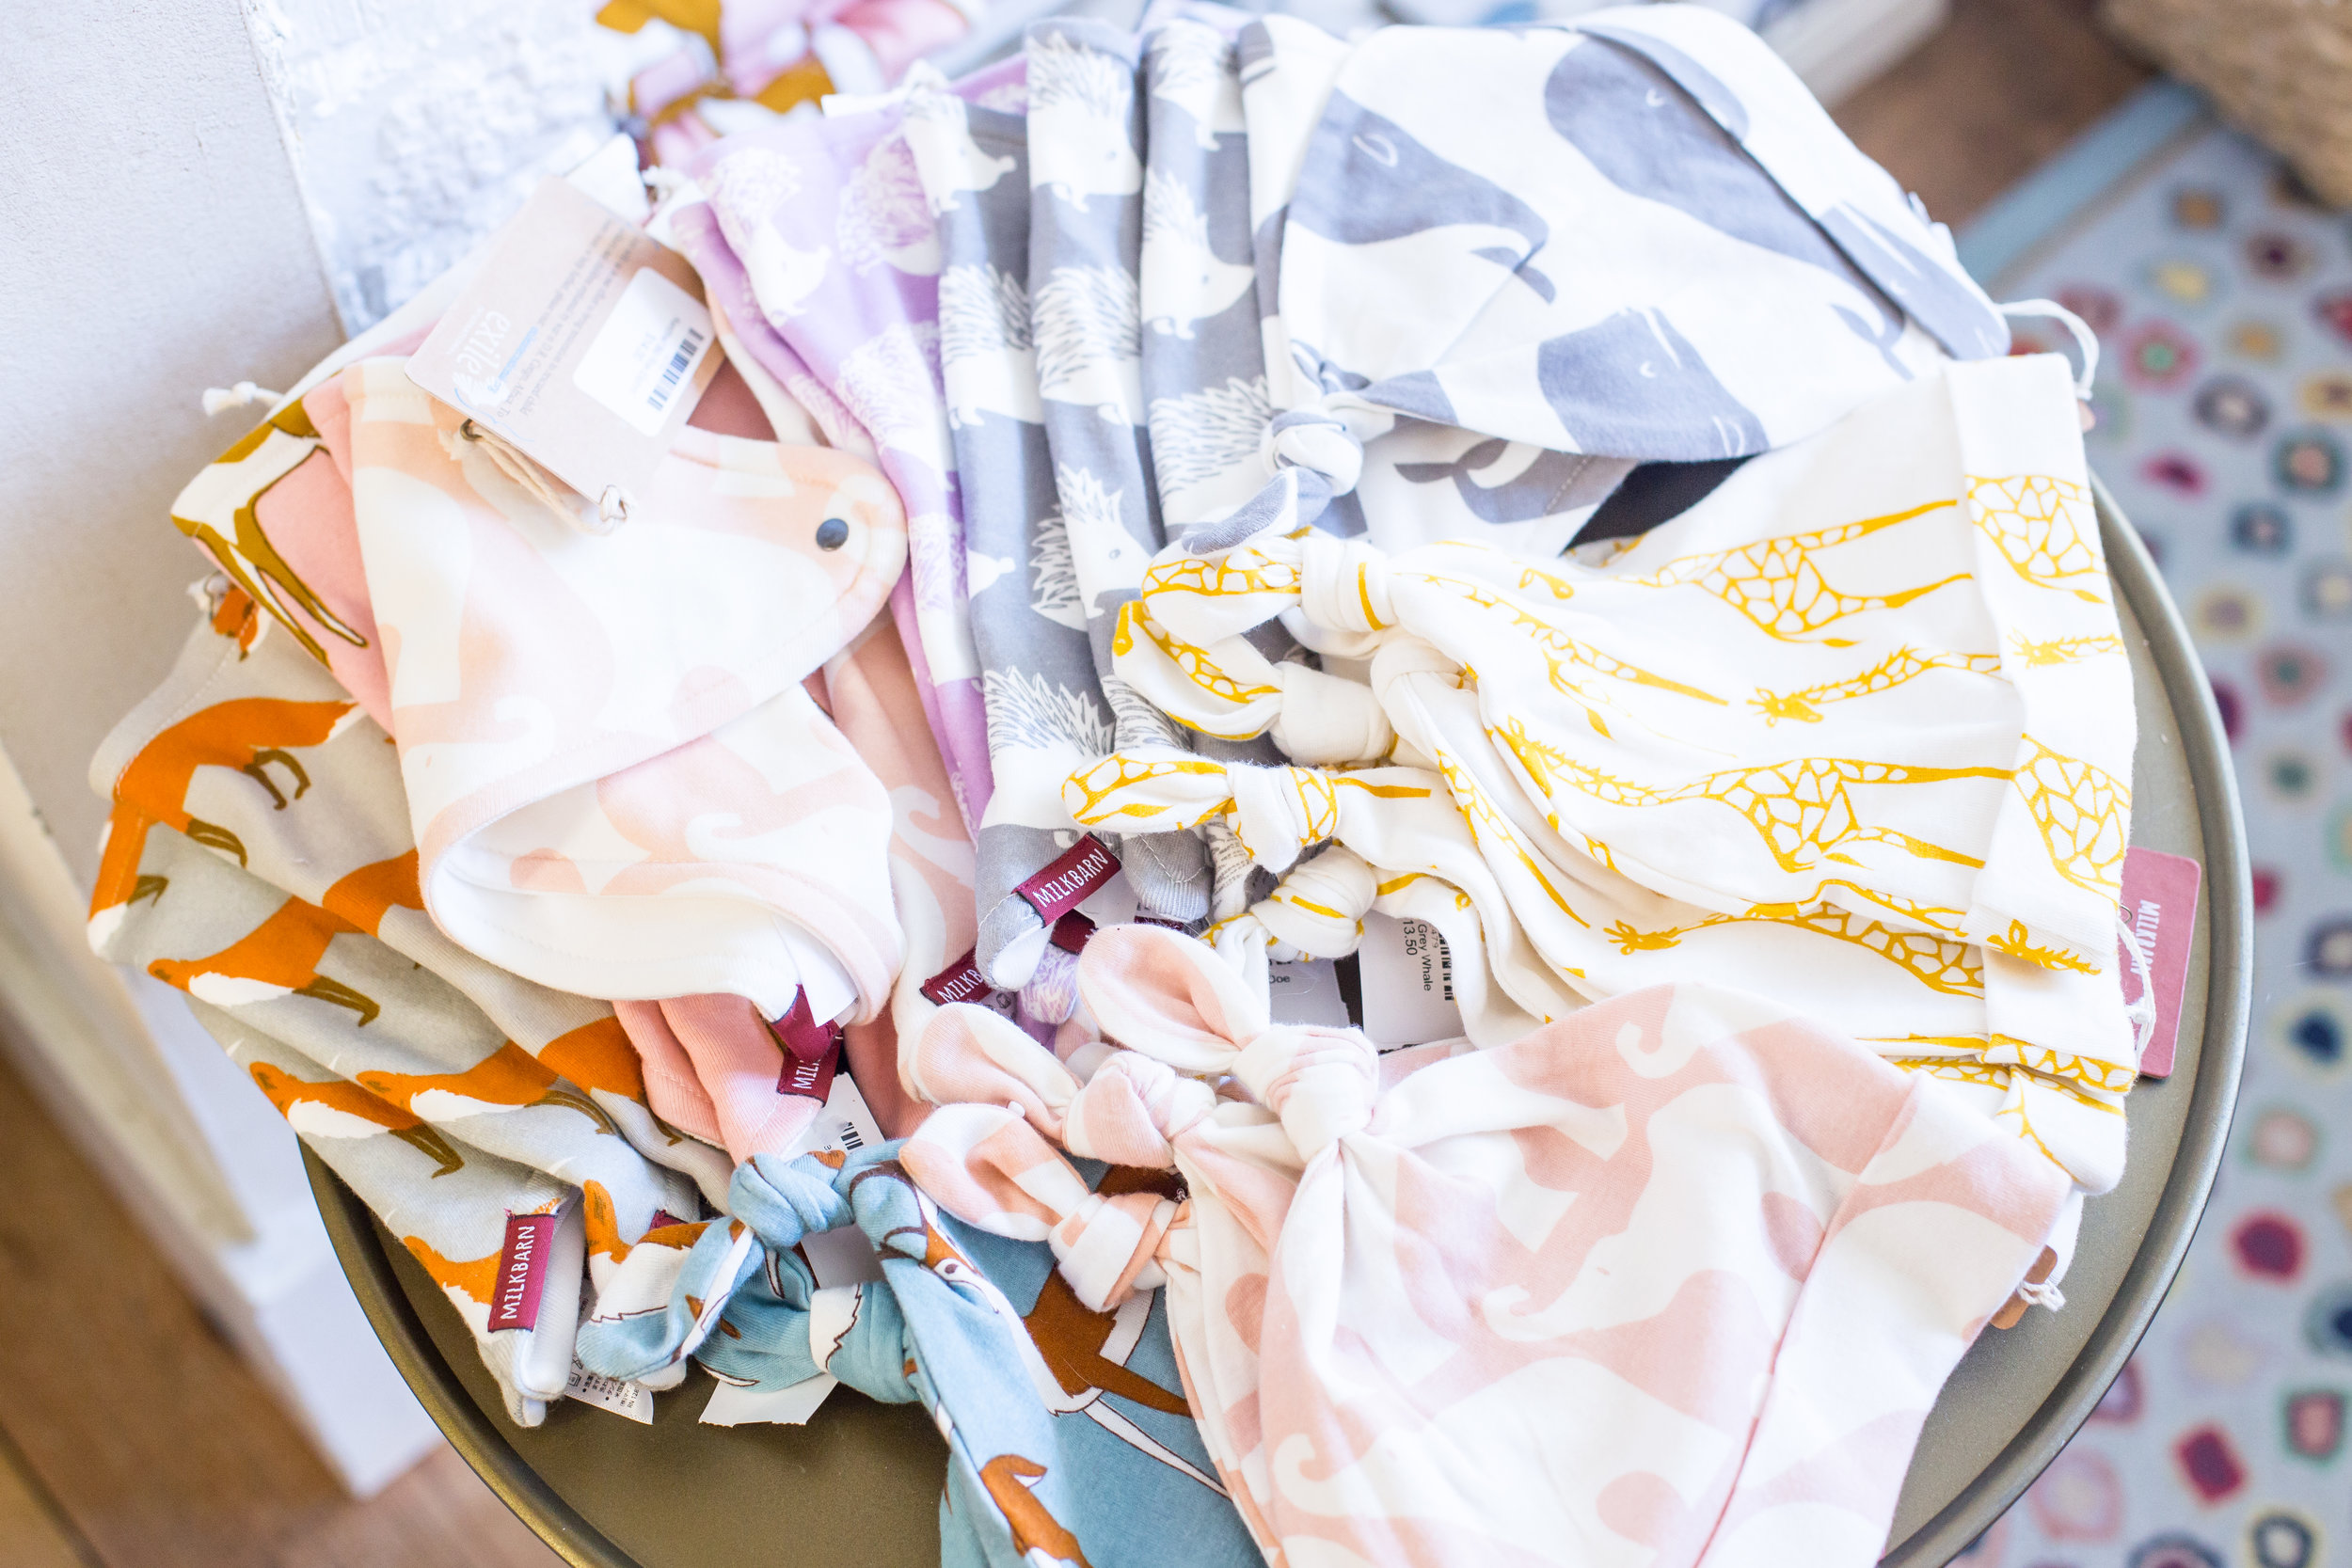 Baby gifts, bibs, colorful patterns